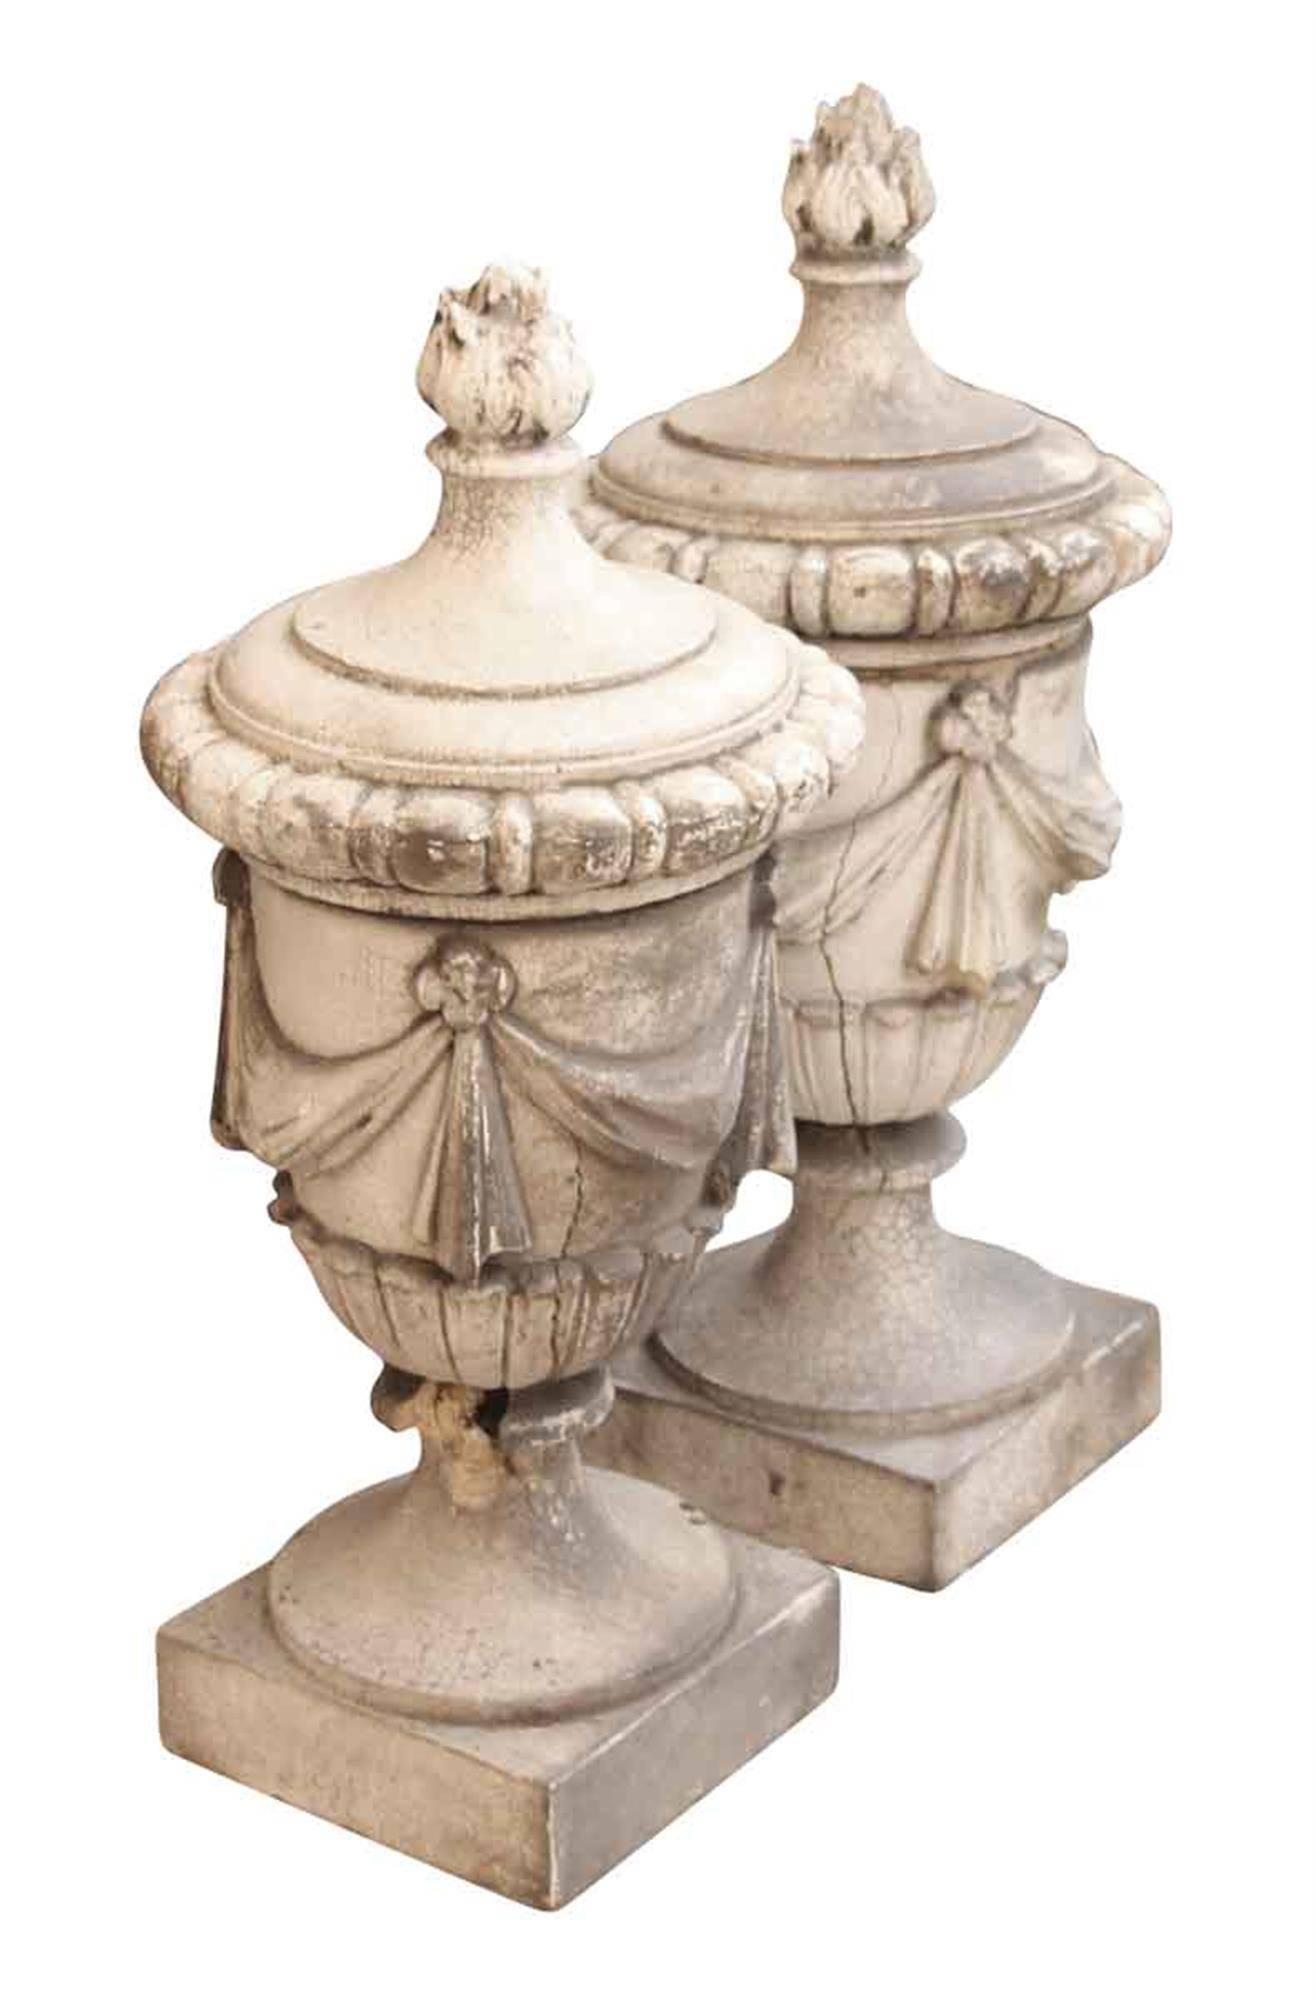 American 1890s Pair of White Crackled Terracotta Urns with Swags